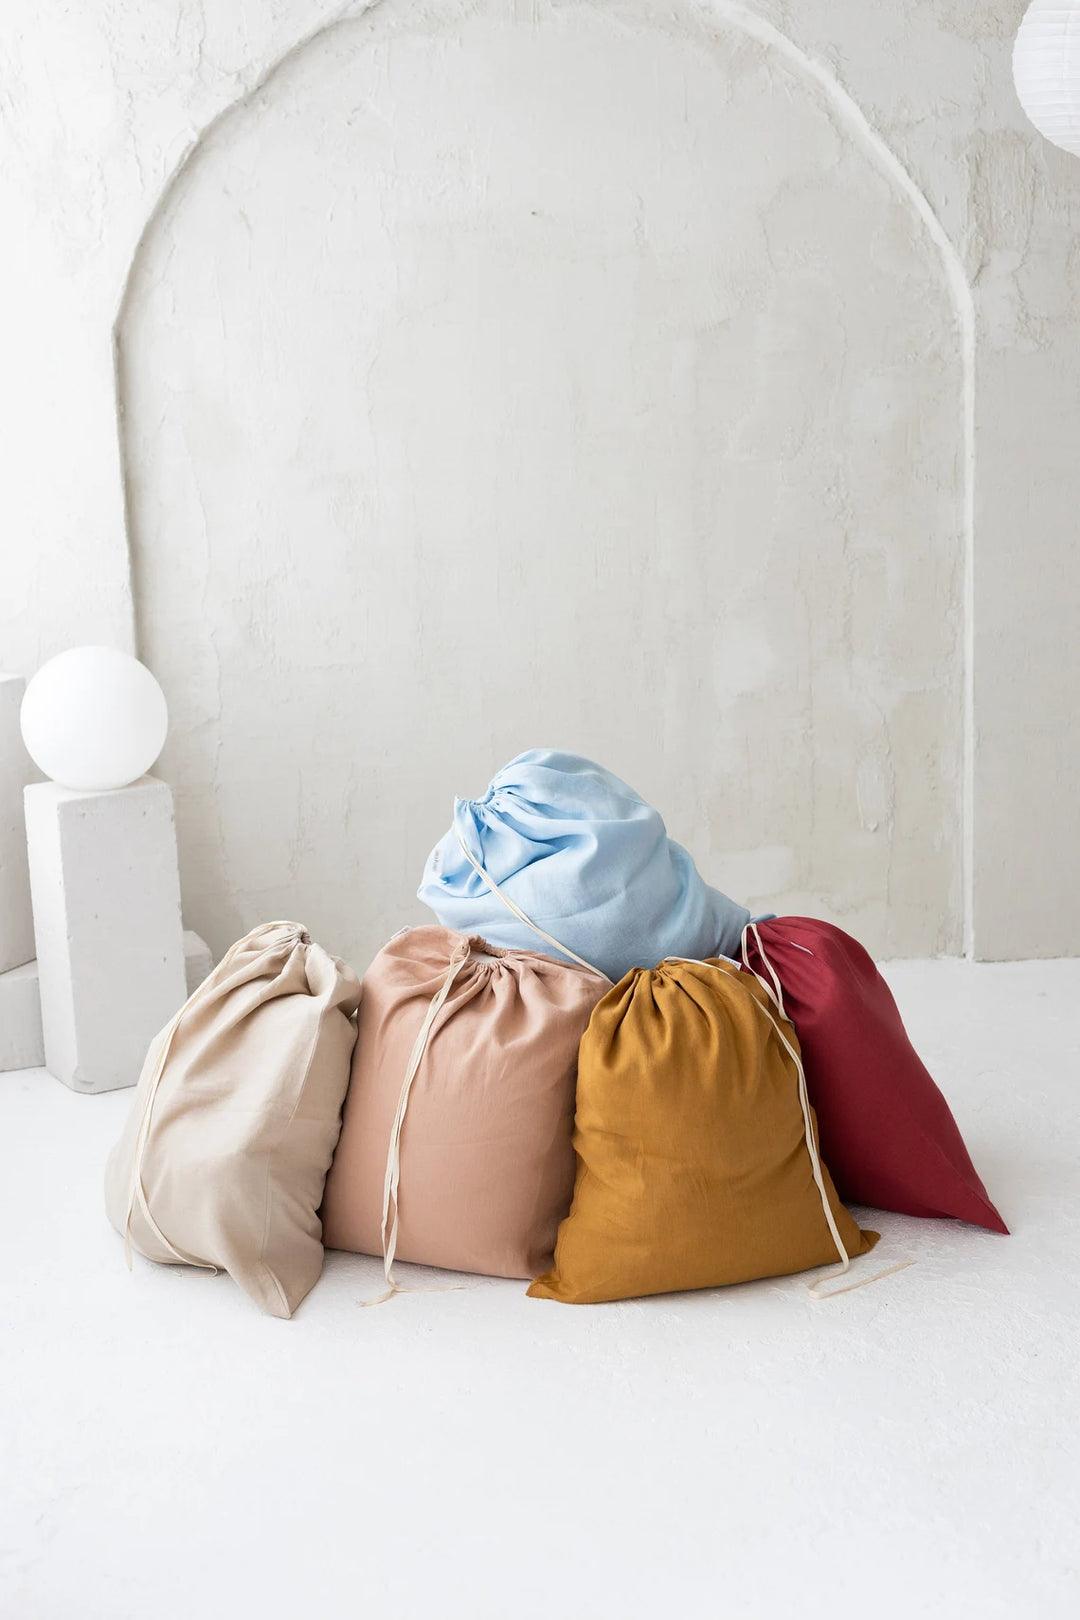 Linen Laundry Bags In Various Colors - Daily Linen